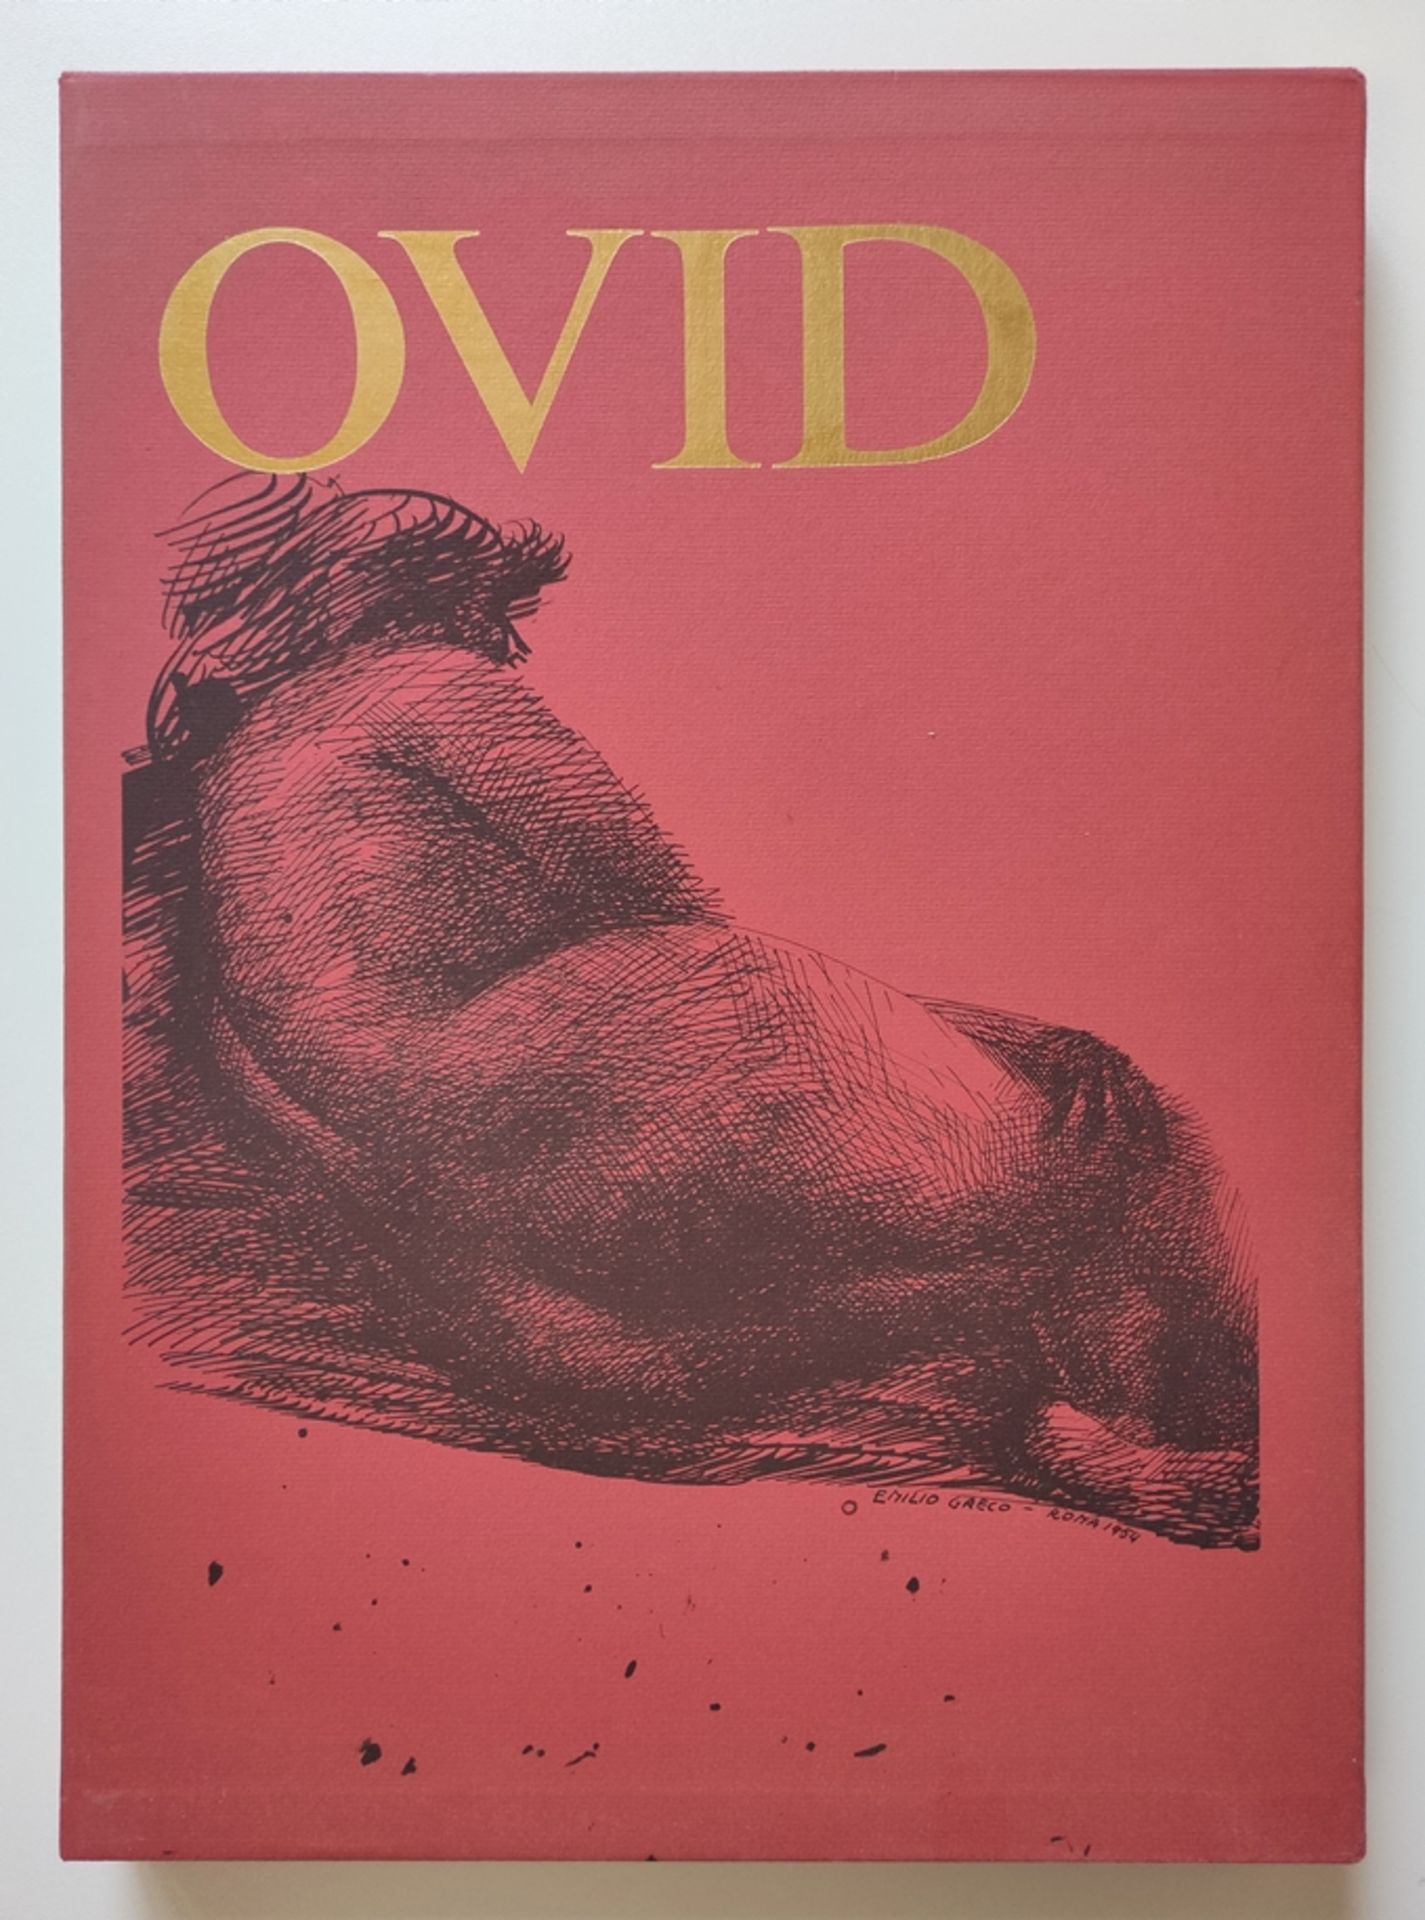 Greco, Emilio (1913 Catania - 1995 Rome) "Ovid. Liebe als Kunst" with 20 illustrations by Emilio Gr